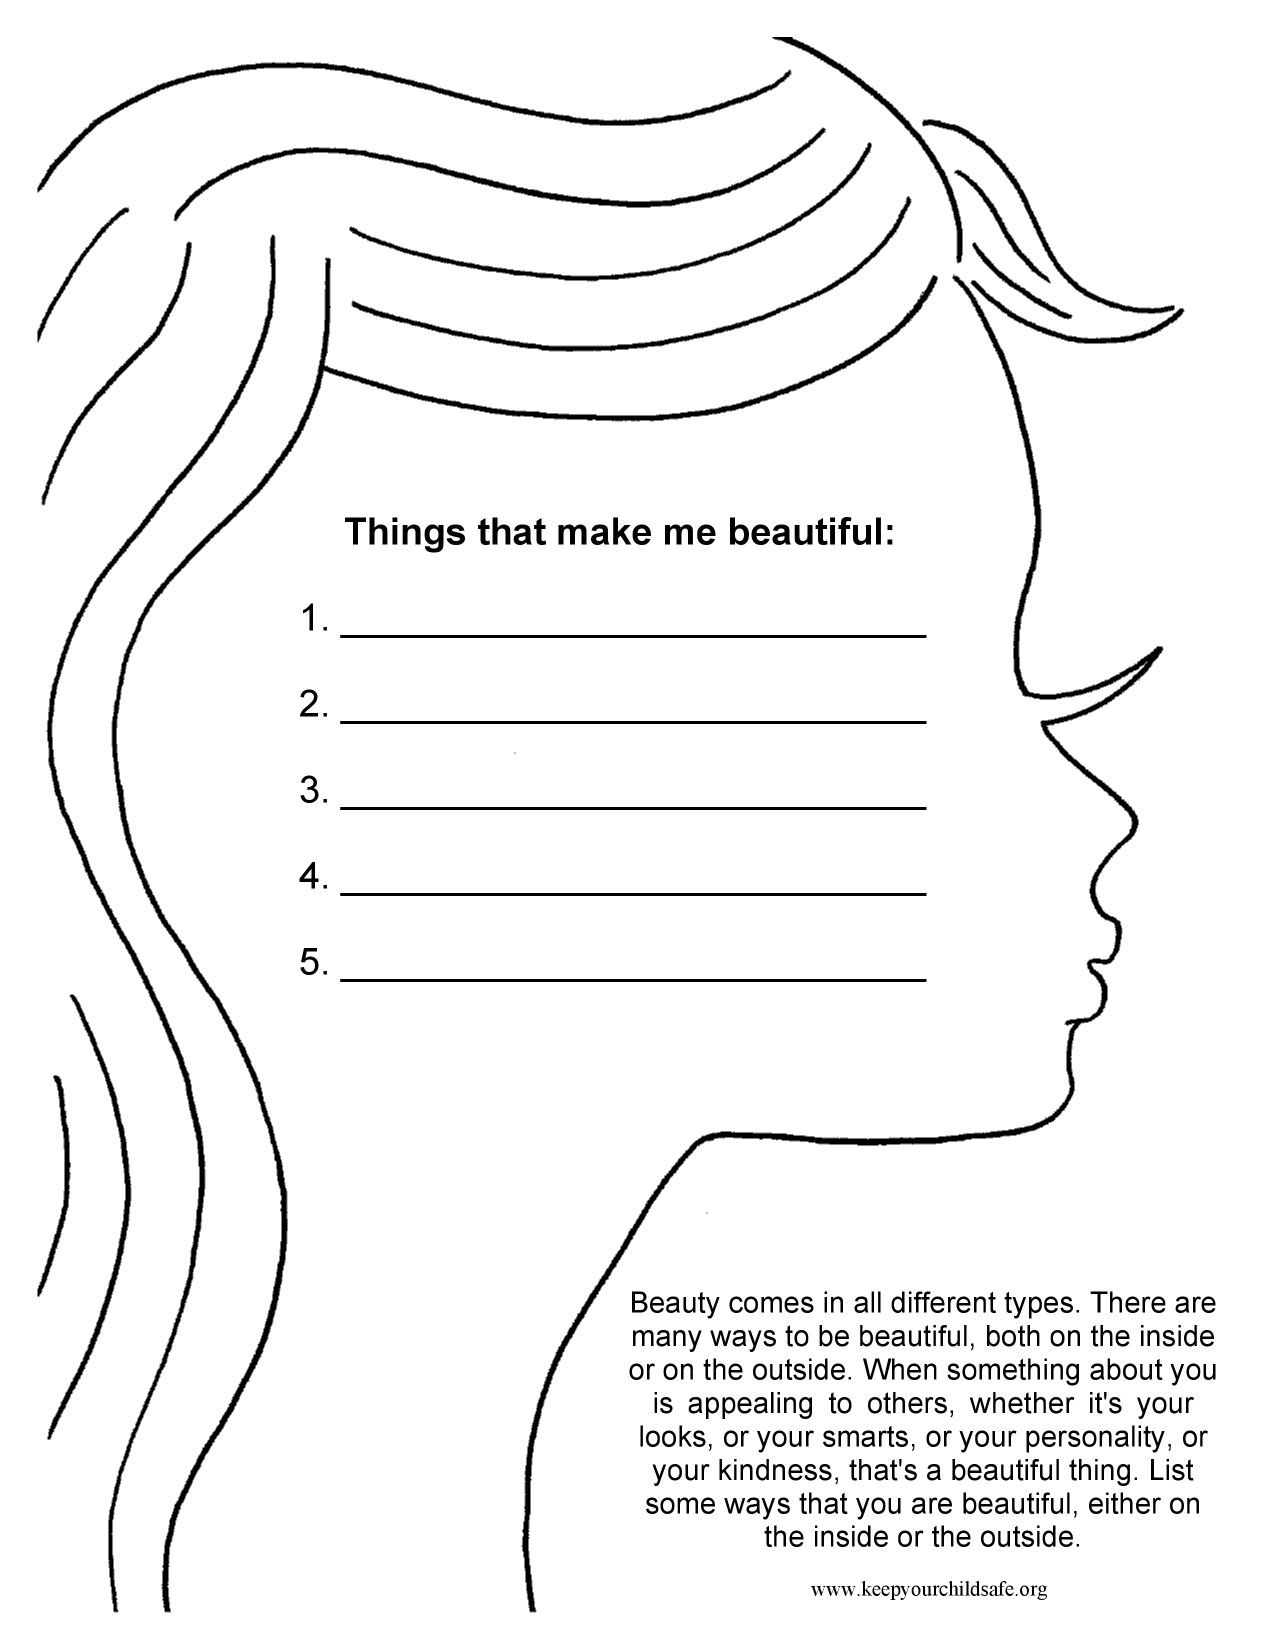 Therapy Worksheets For Low Self Esteem AlphabetWorksheetsFree com